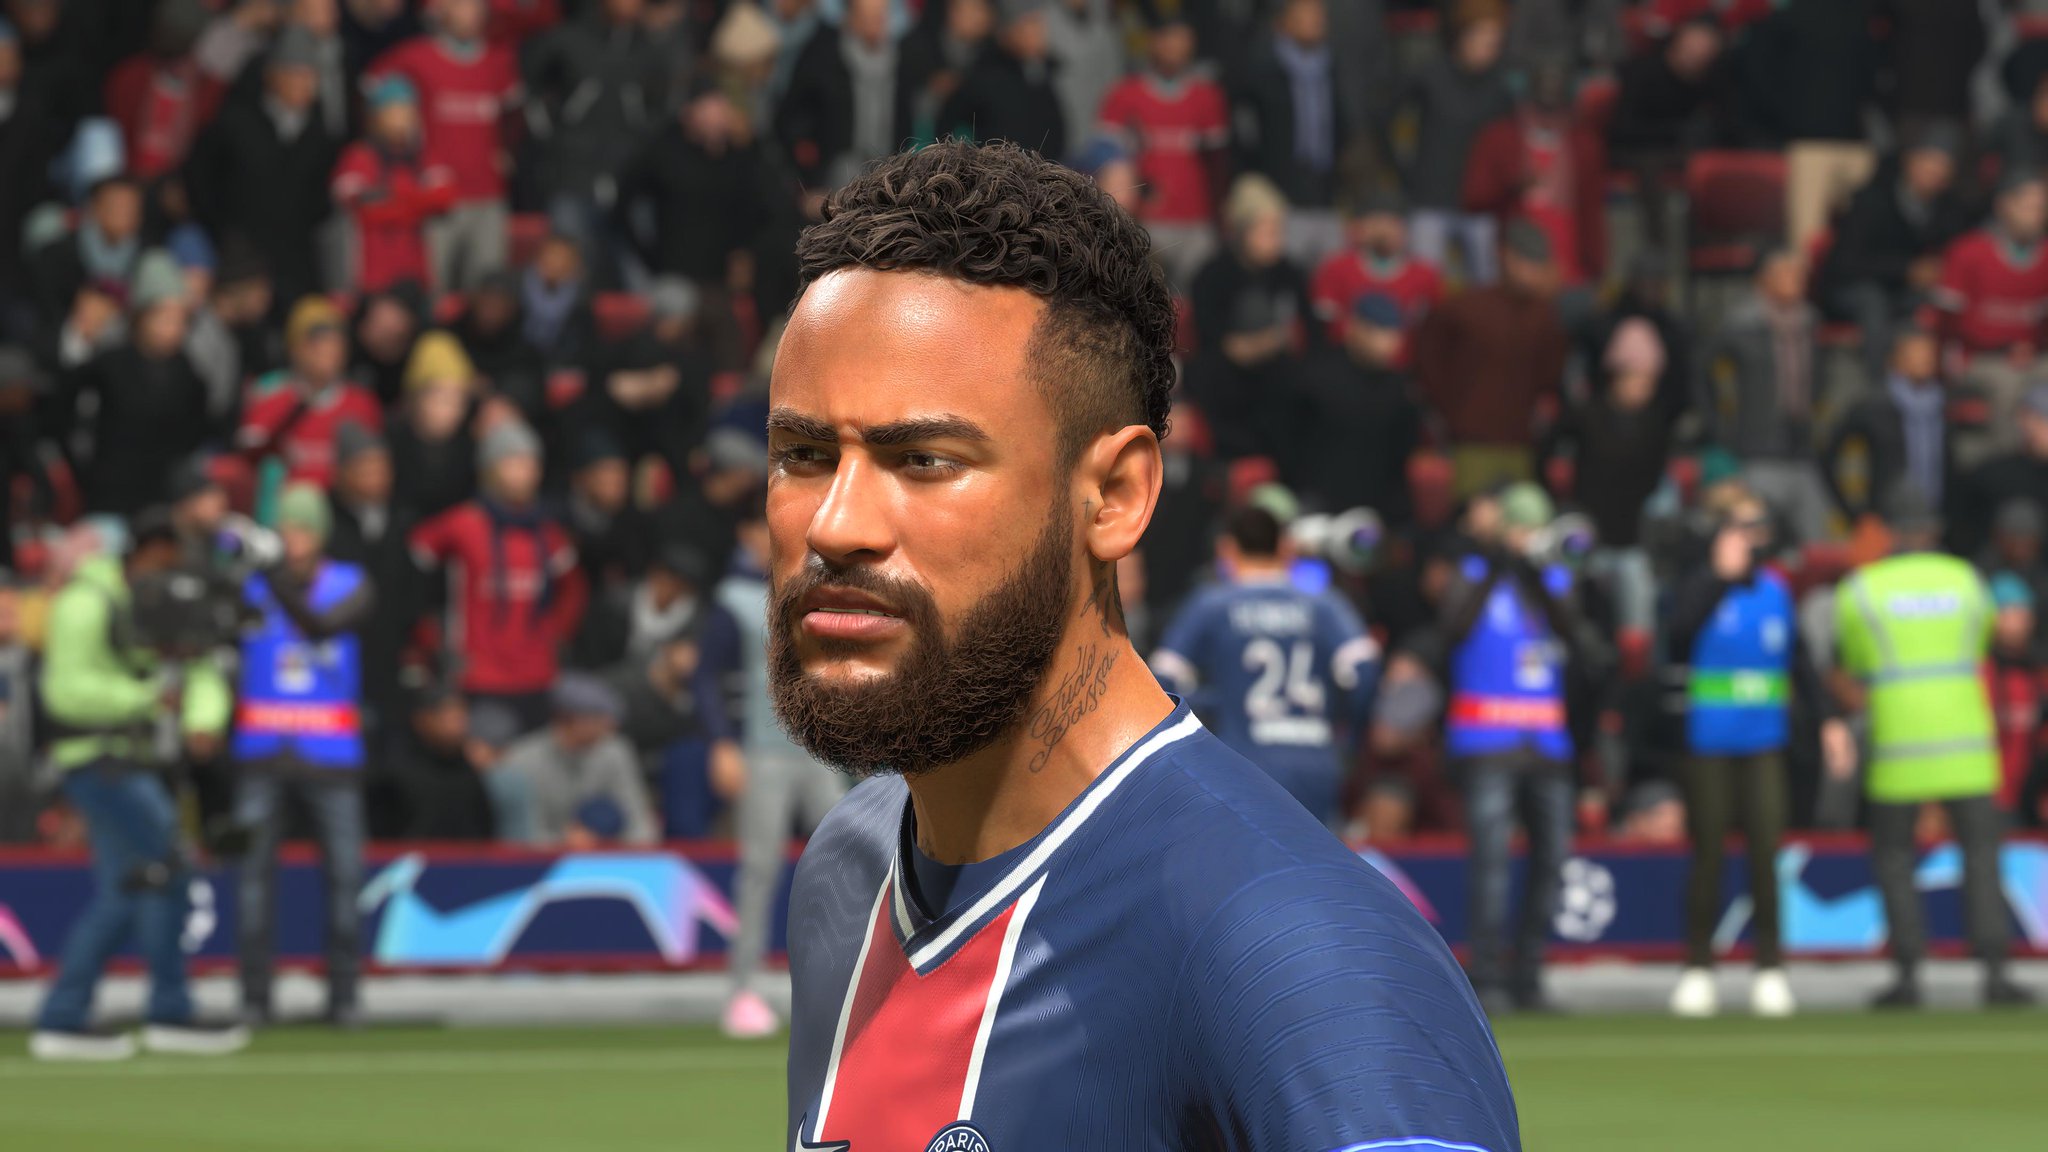 Why FIFA 22 On PC Won't Have Next Gen Features